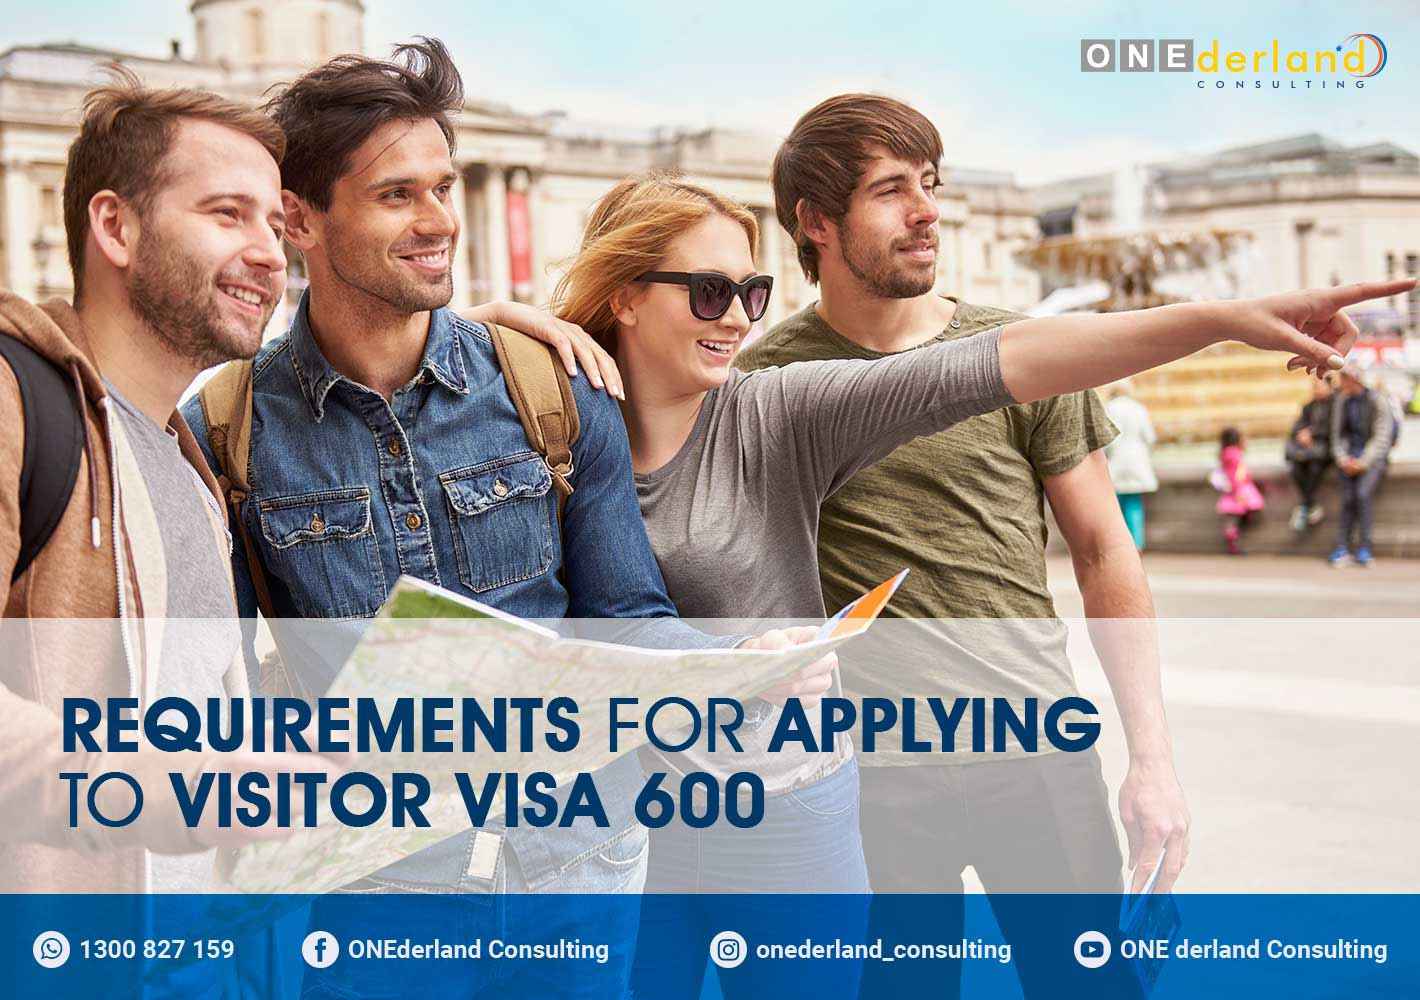 Requirements For Applying an Australian Visitor Visa 600